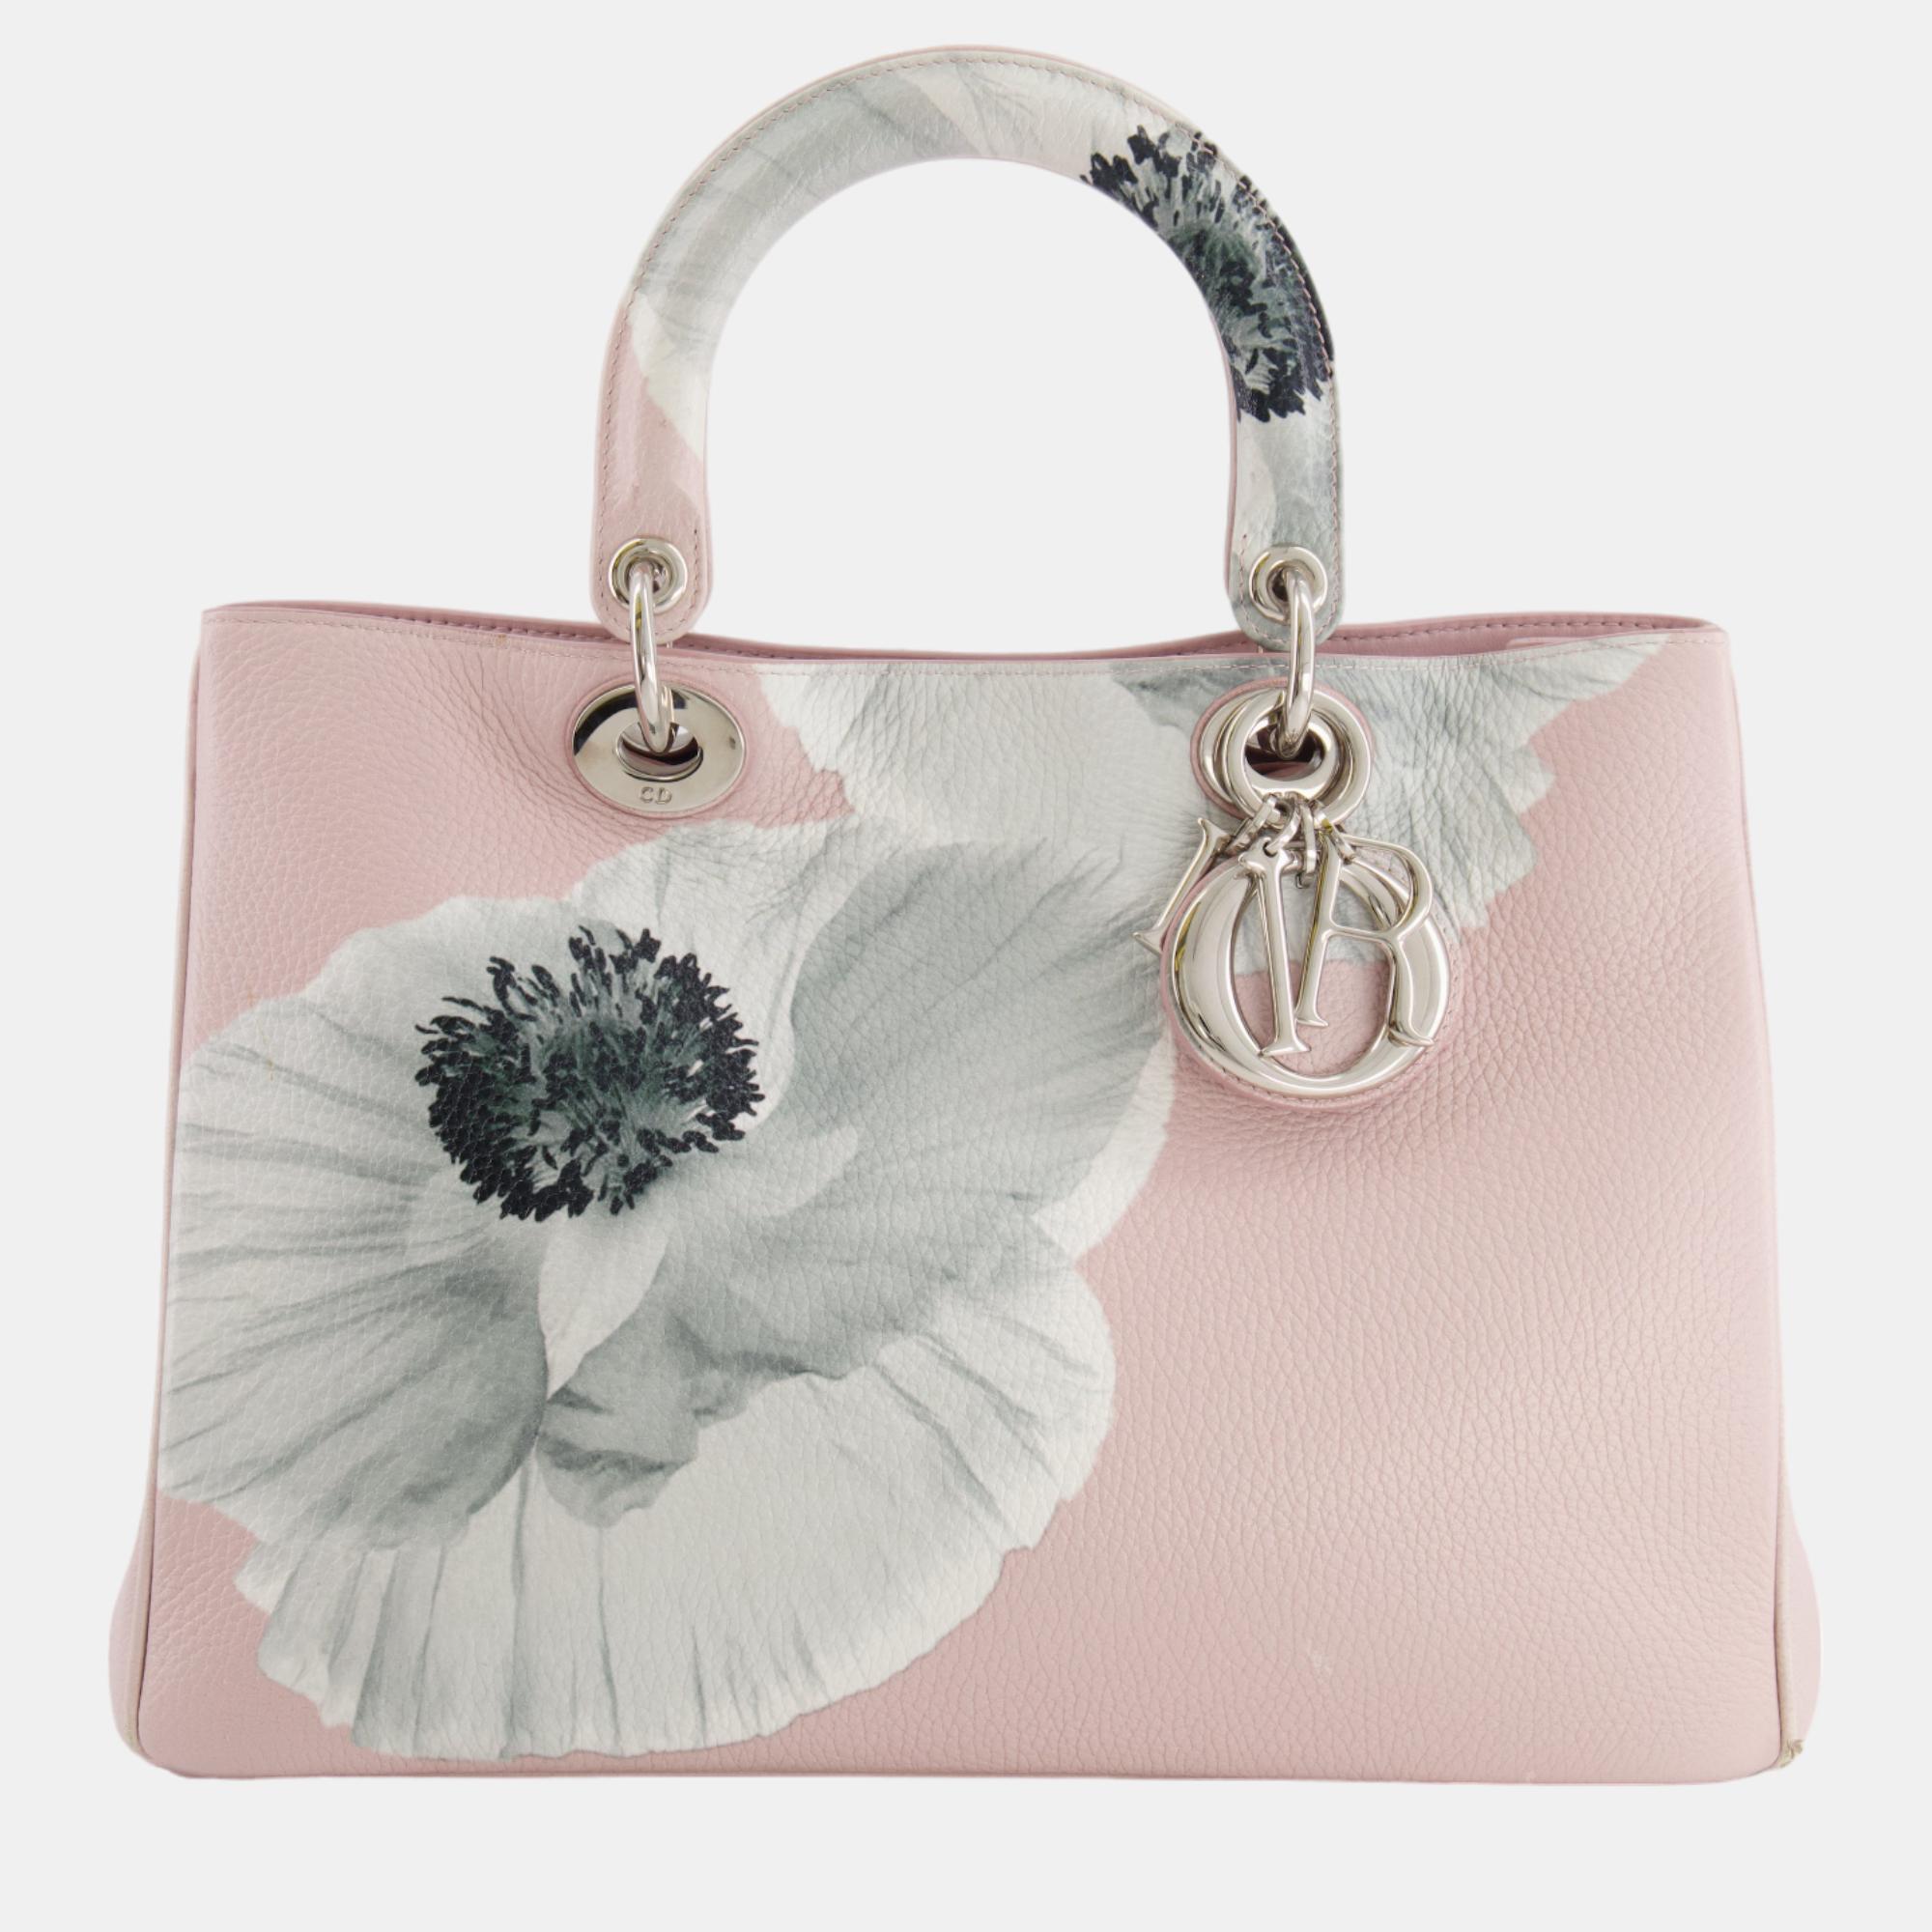 Christian Dior Light Pink And Grey Floral Diorissimo Bag With Silver Hardware